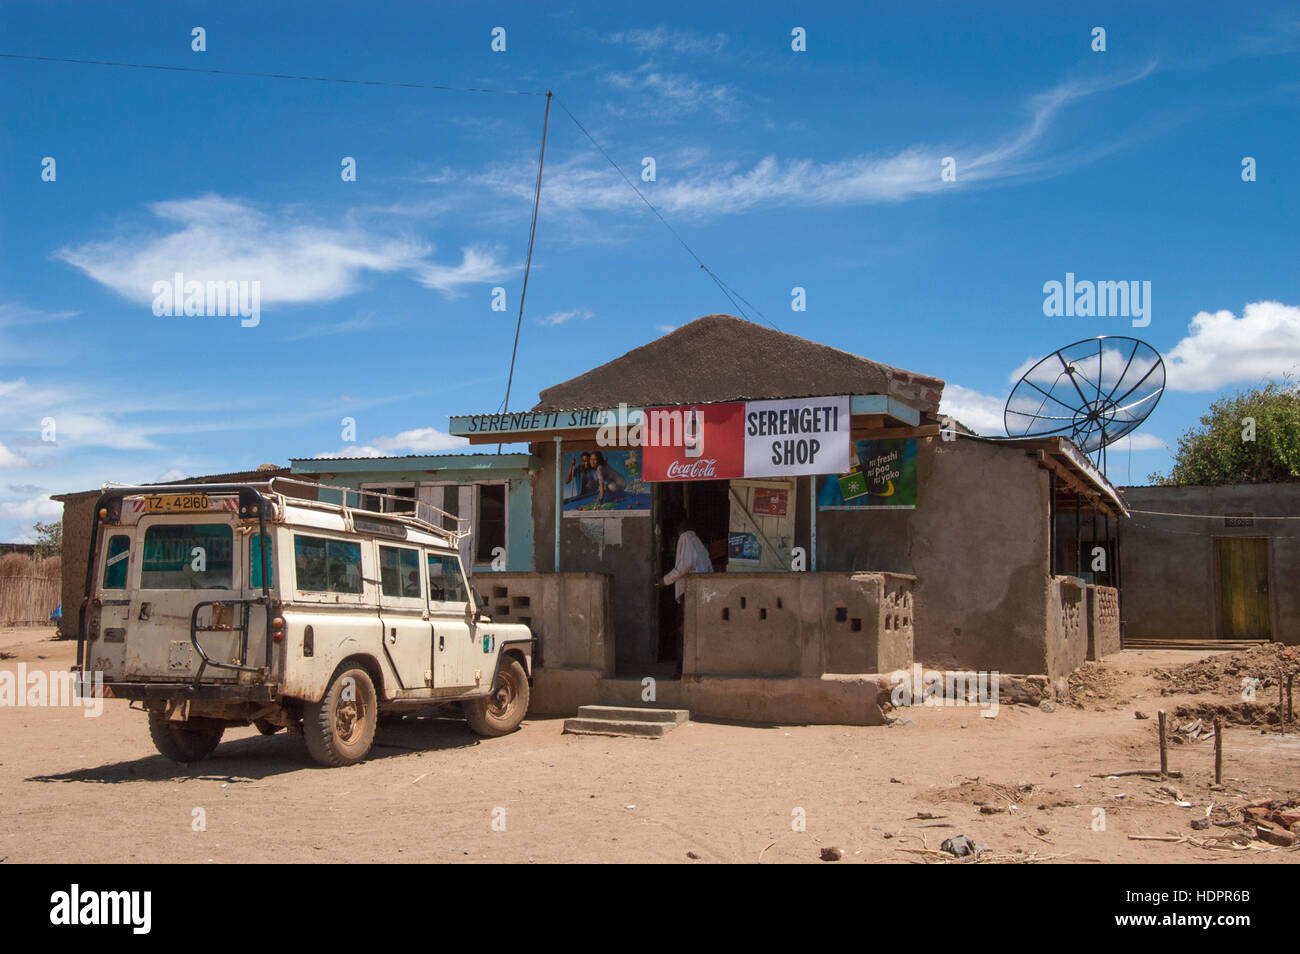 Groceries shop with jeep parked in front and satellite dish, Lake Eyasi, Manyara region, Tanzania Stock Photo